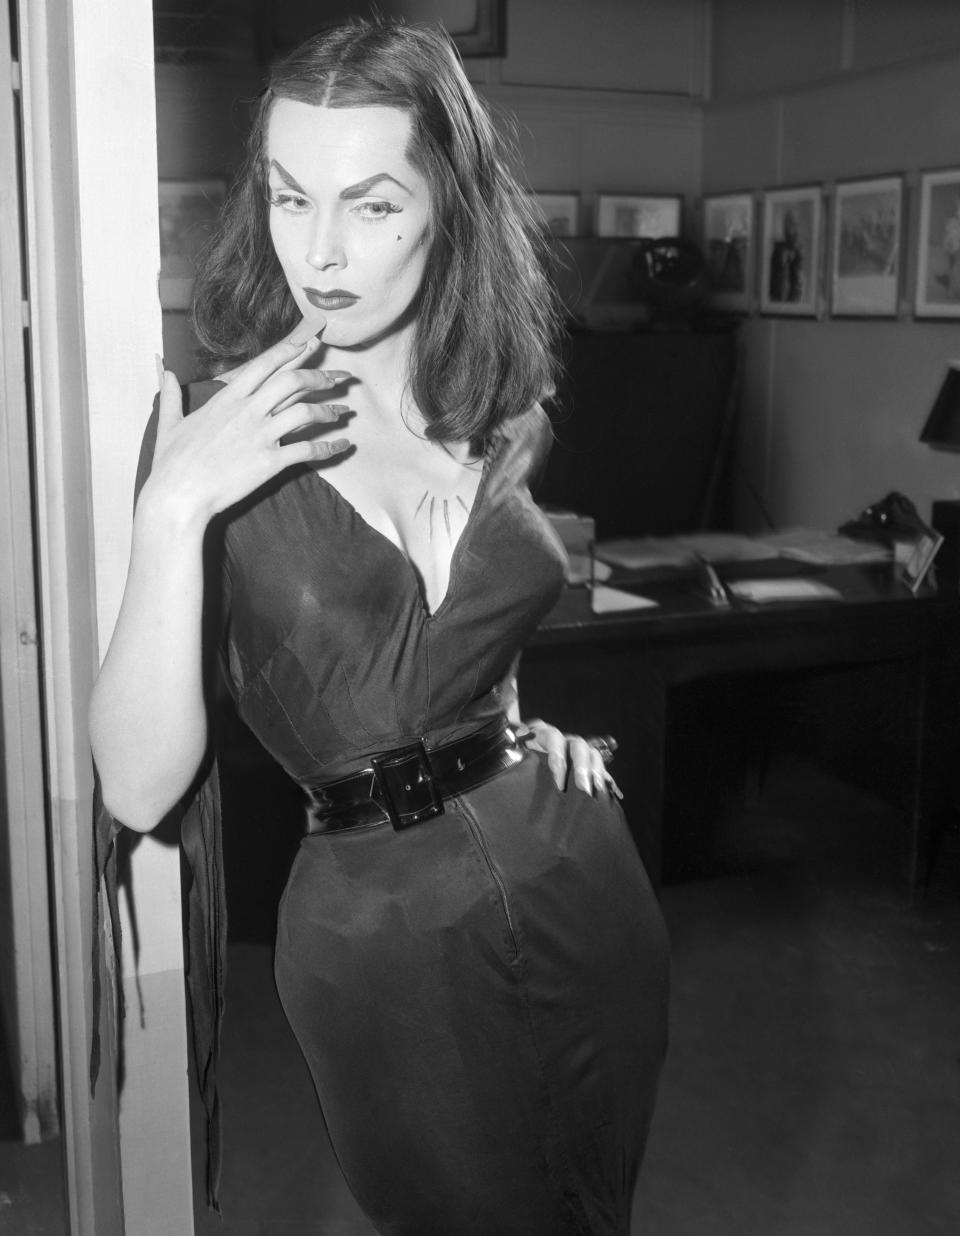 Vampira, the campy 1950s TV personality played by Maila Nurmi, has been dubbed the "<a href="https://www.amazon.com/exec/obidos/ASIN/1593765436/boingboing" target="_blank" rel="noopener noreferrer">dark goddess of horror</a>." Her look was one part Bettie Page, one part Morticia Addams and one part gothic '50s housewife. To recreate her style, you'll need a fitted black dress, some red lipstick, some extra-long red nails and severely arched brows. To finish everything off, wrap a chunky belt around your waist.